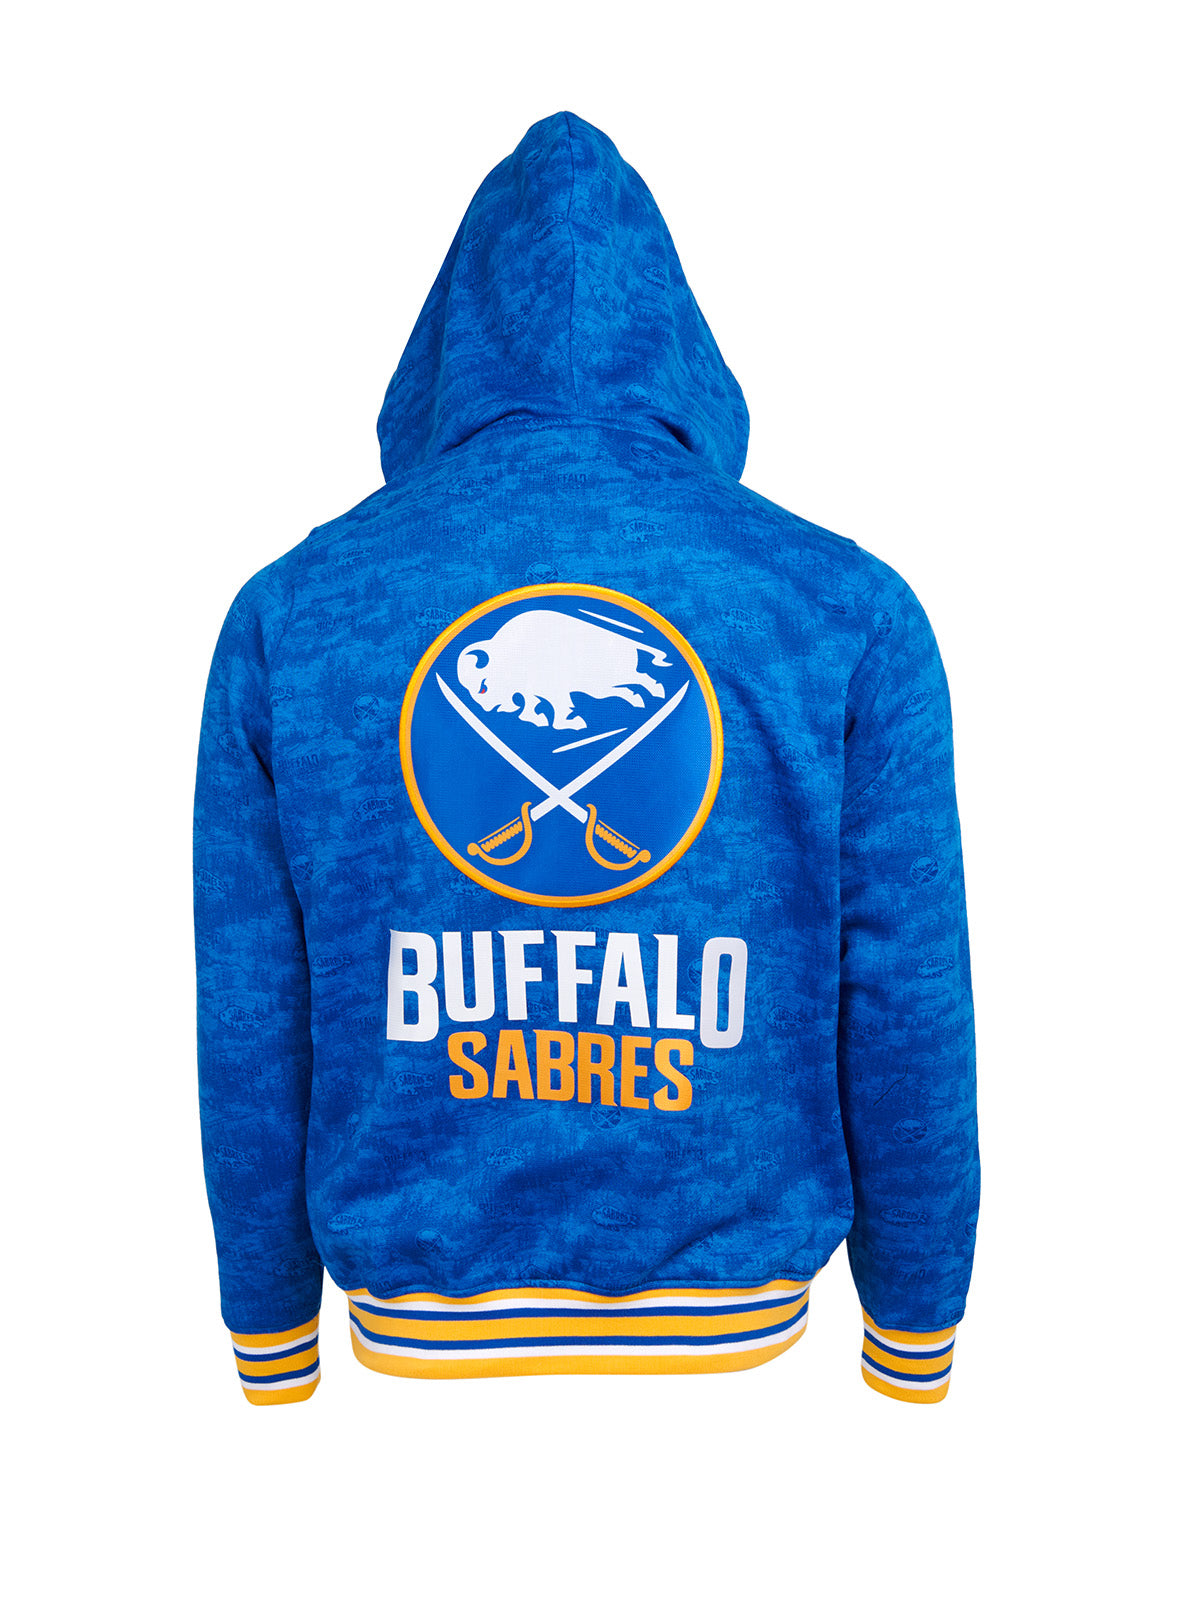 Buffalo Sabres Hoodie - Show your team spirit, with the iconic team logo patch on the back, and proudly display your Buffalo Sabres support in their team colors with this NHL hockey hoodie.